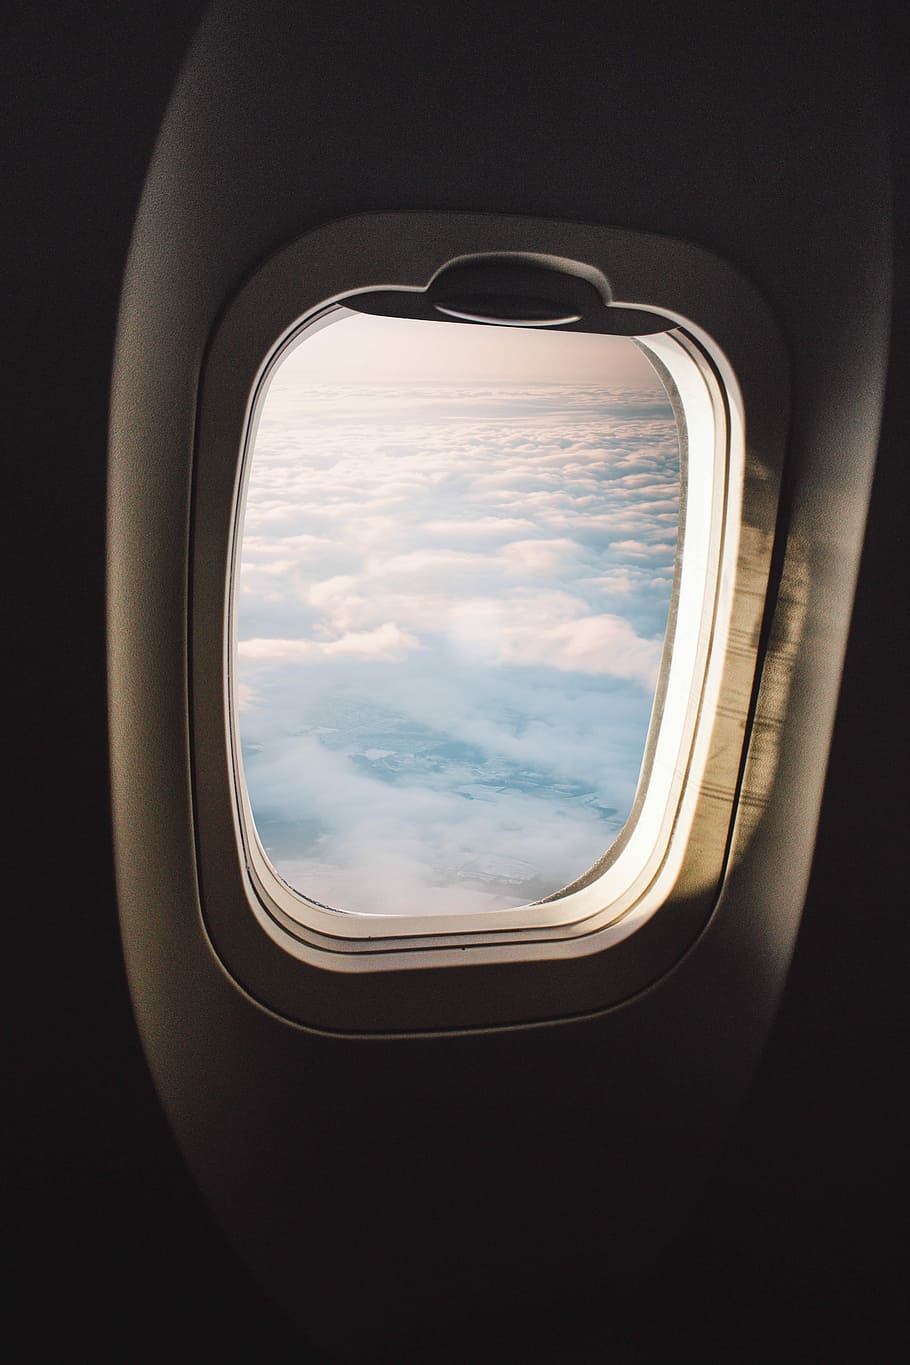 aerial photography of white clouds, view of airplane window, cloudy